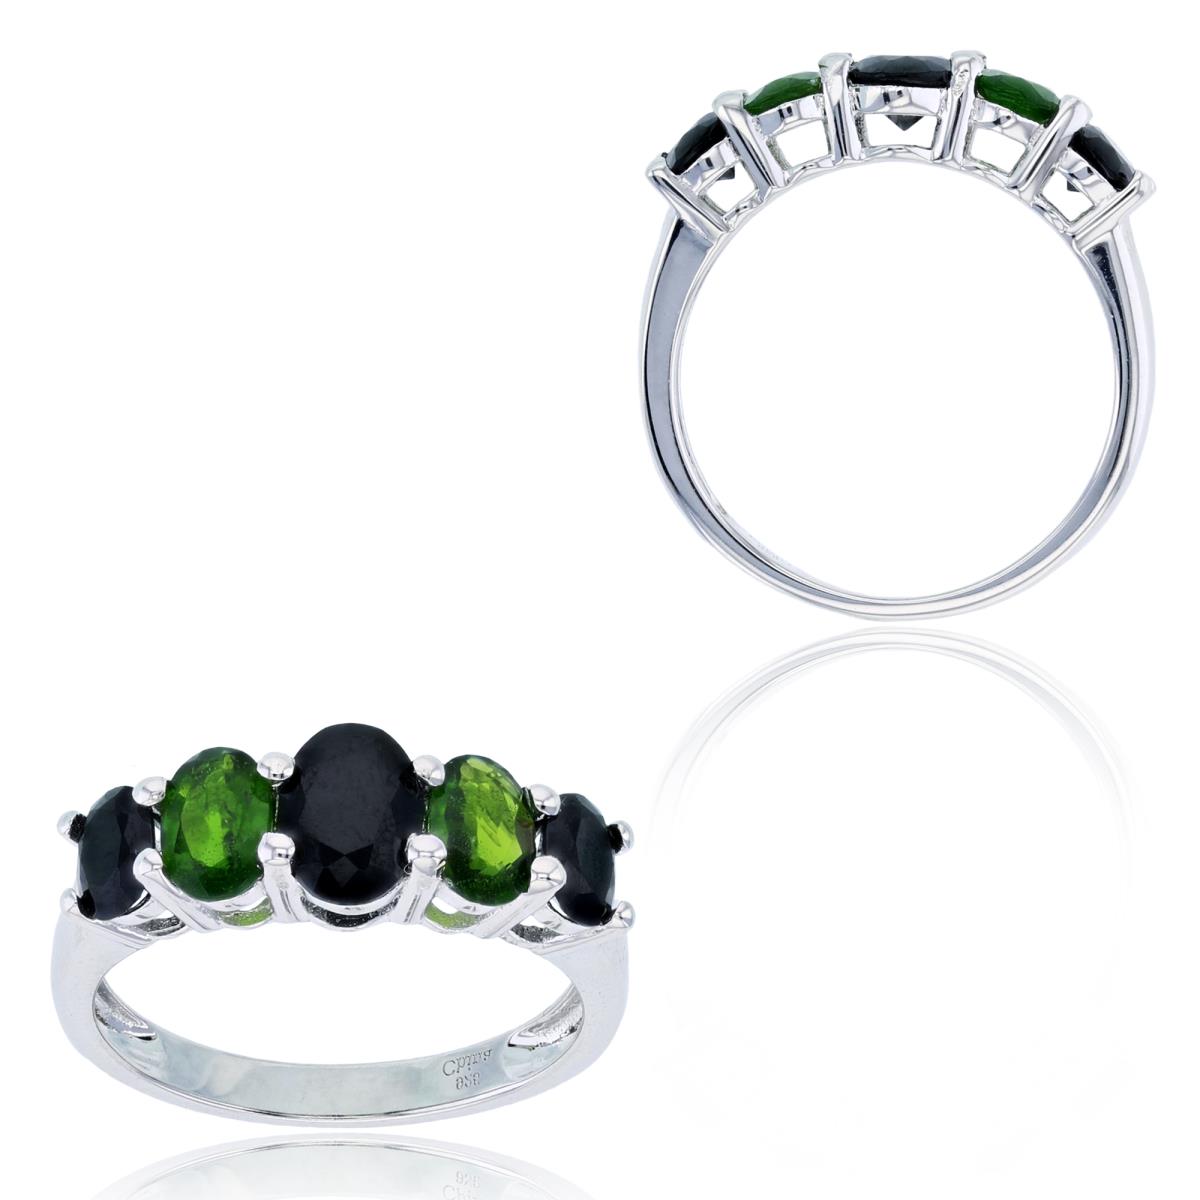 Sterling Silver Rhodium Graduated Oval Black Spinel/Chrome Diopside Fashion Ring